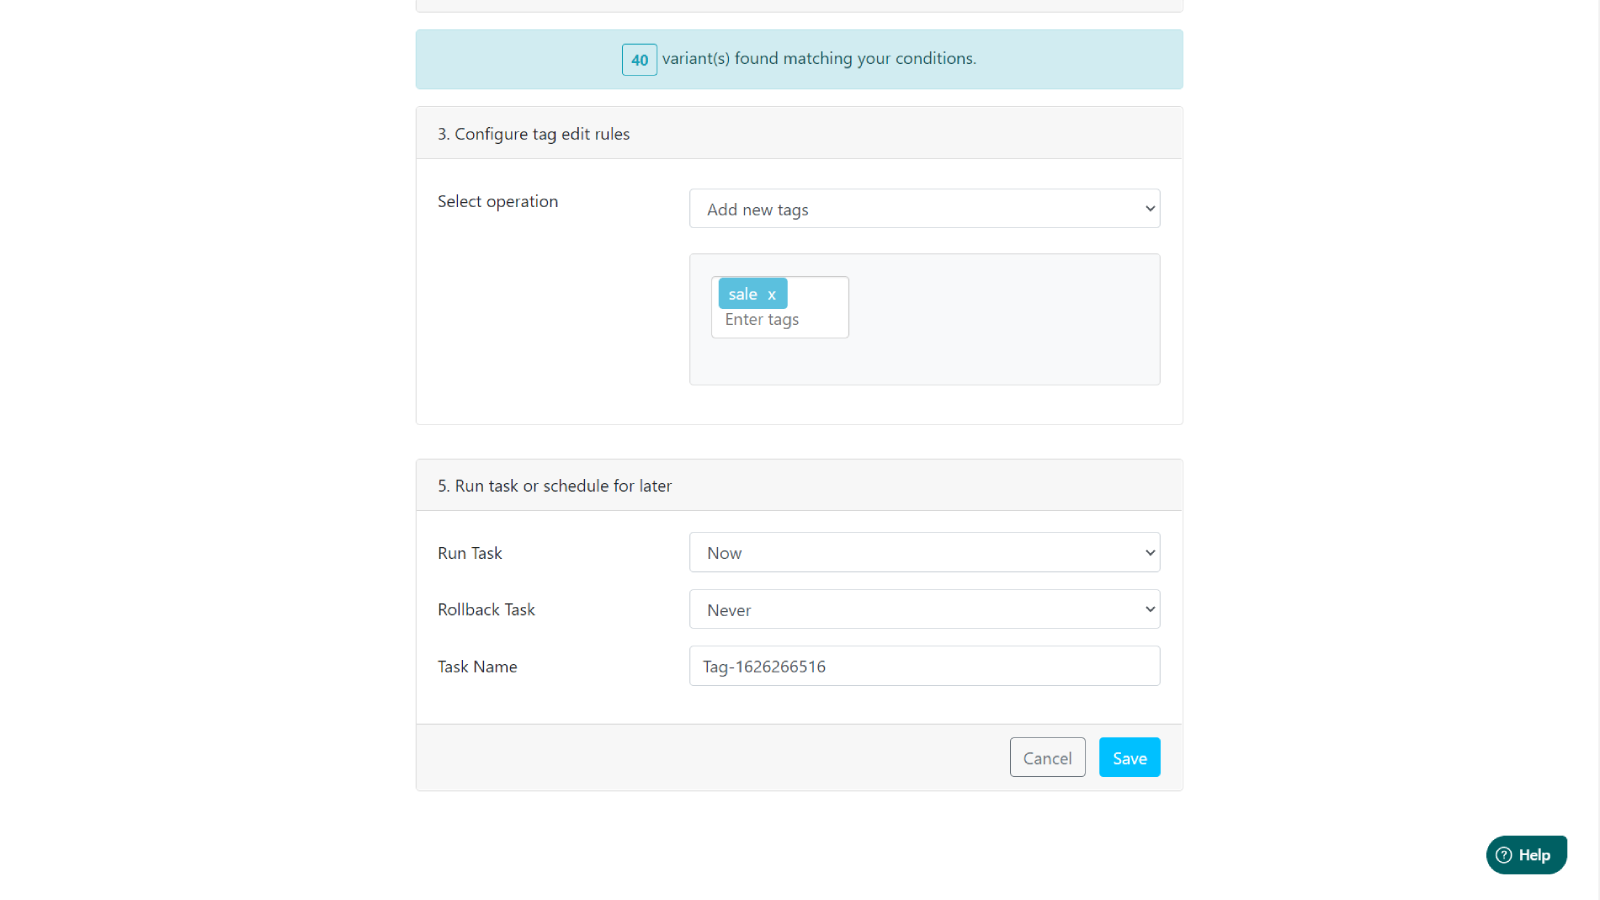 Configure tag actions